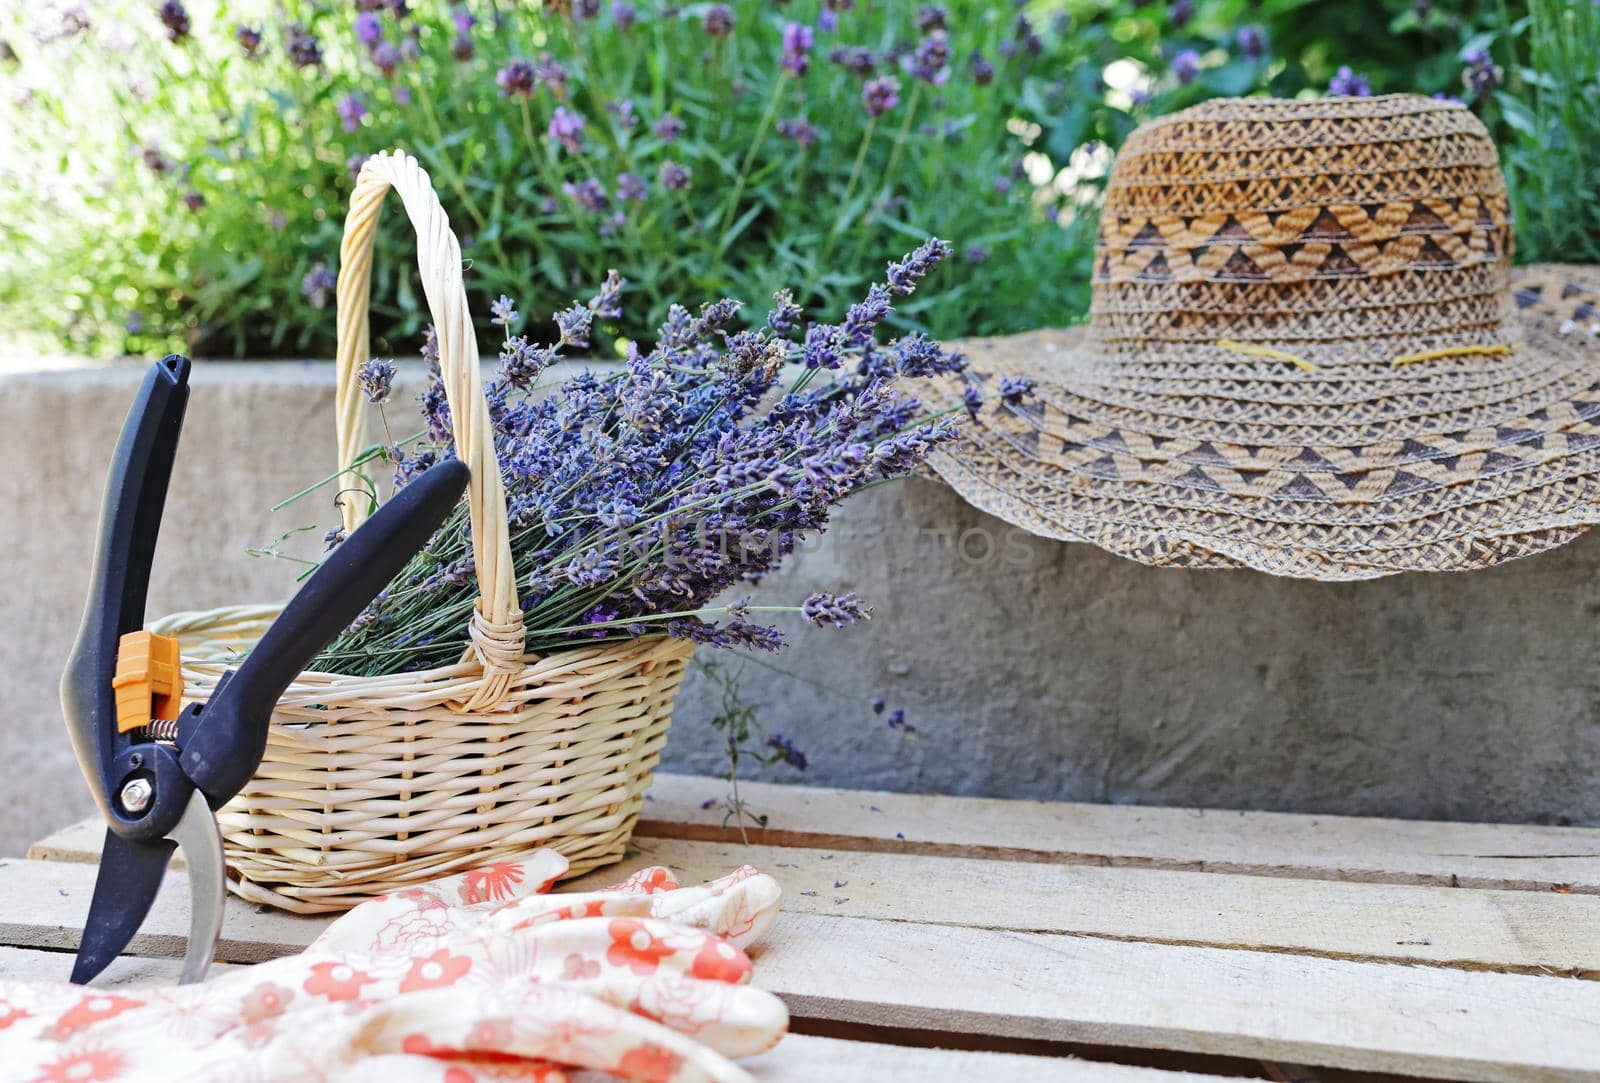 Cut dry lavender flowers in a small wicker basket in the garden next to blooming lavender bushes and summer hat